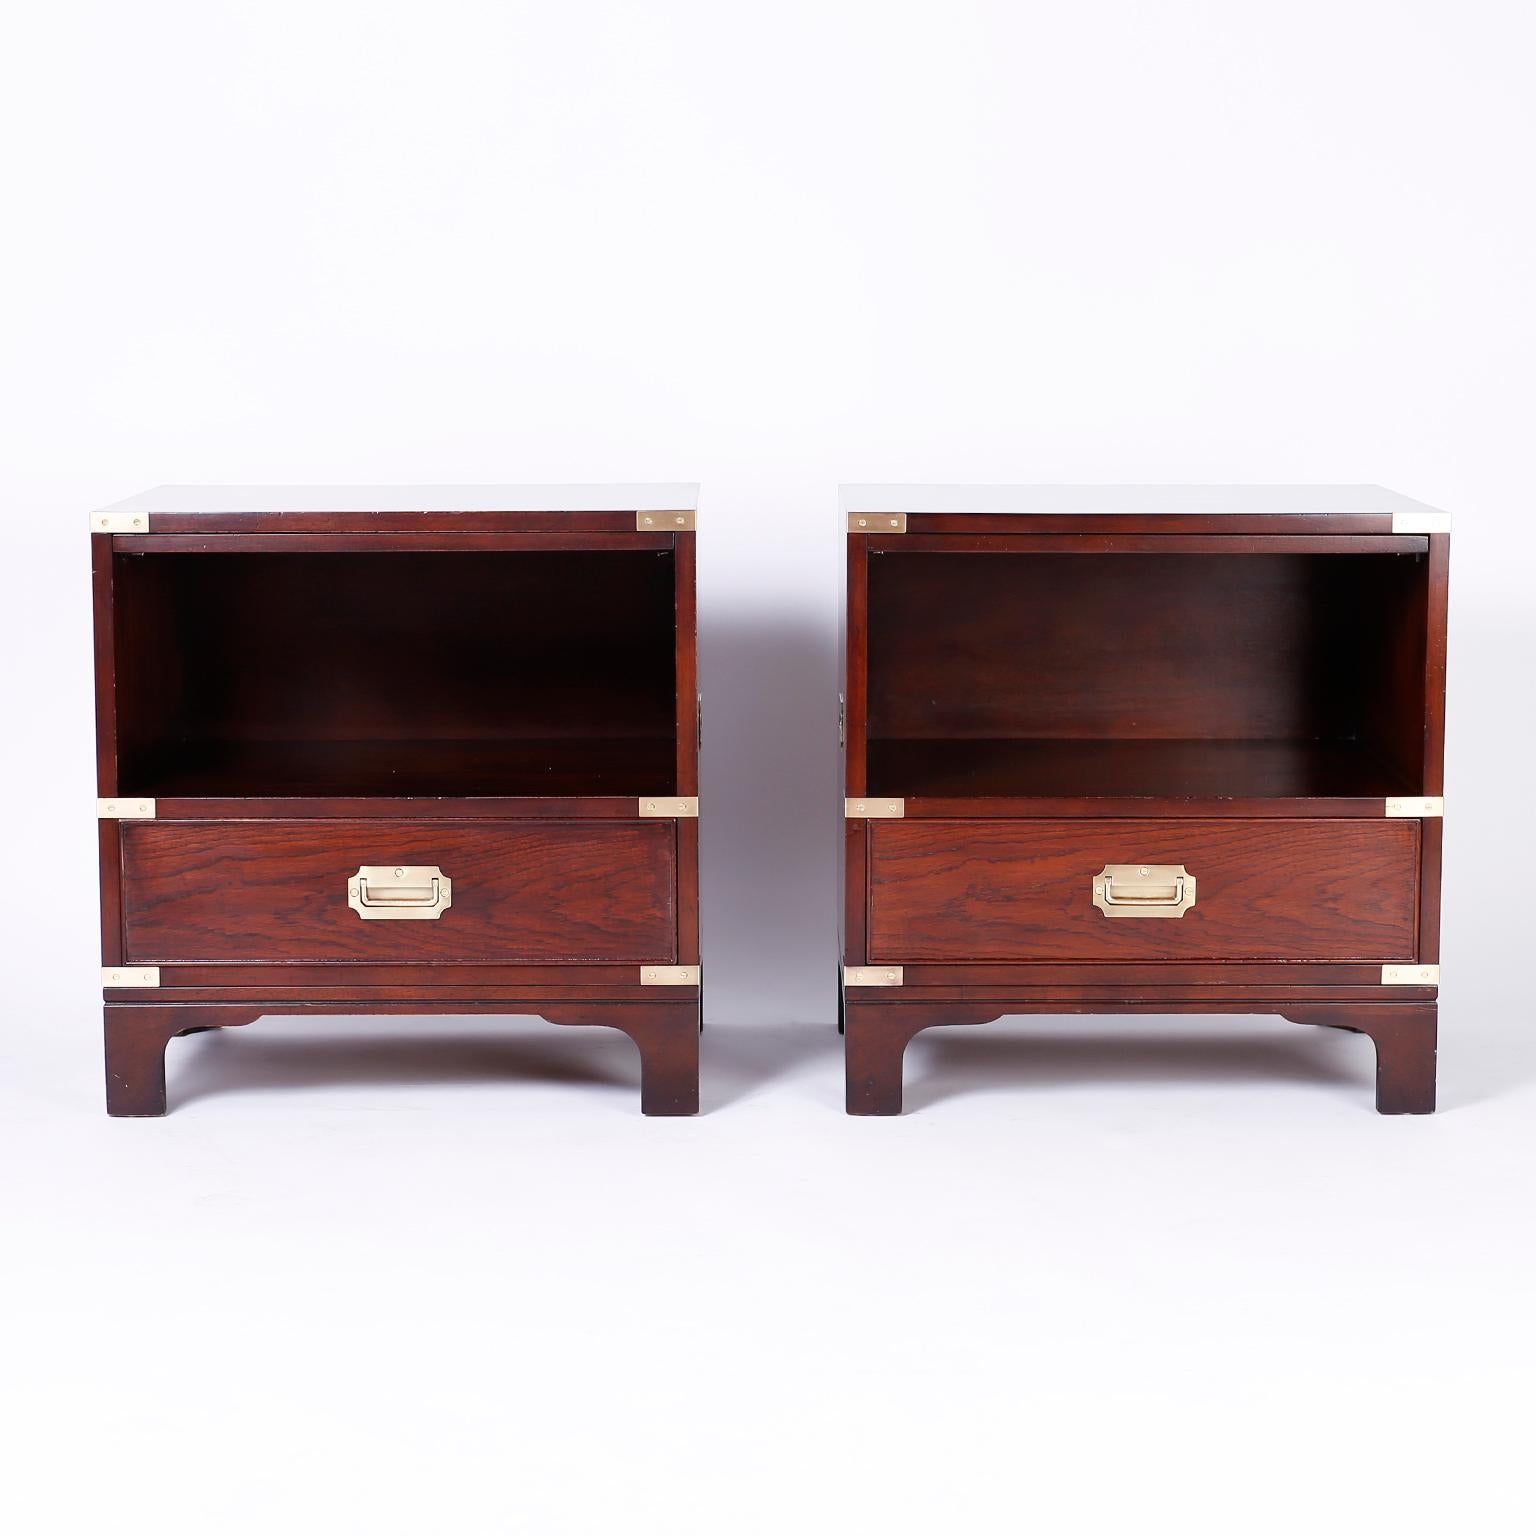 Pair of mahogany nightstands with Campaign style brass hardware, slide out tray, storage space over a drawer and Classic bracket feet. Signed Beacon Hill Collection in a drawer.